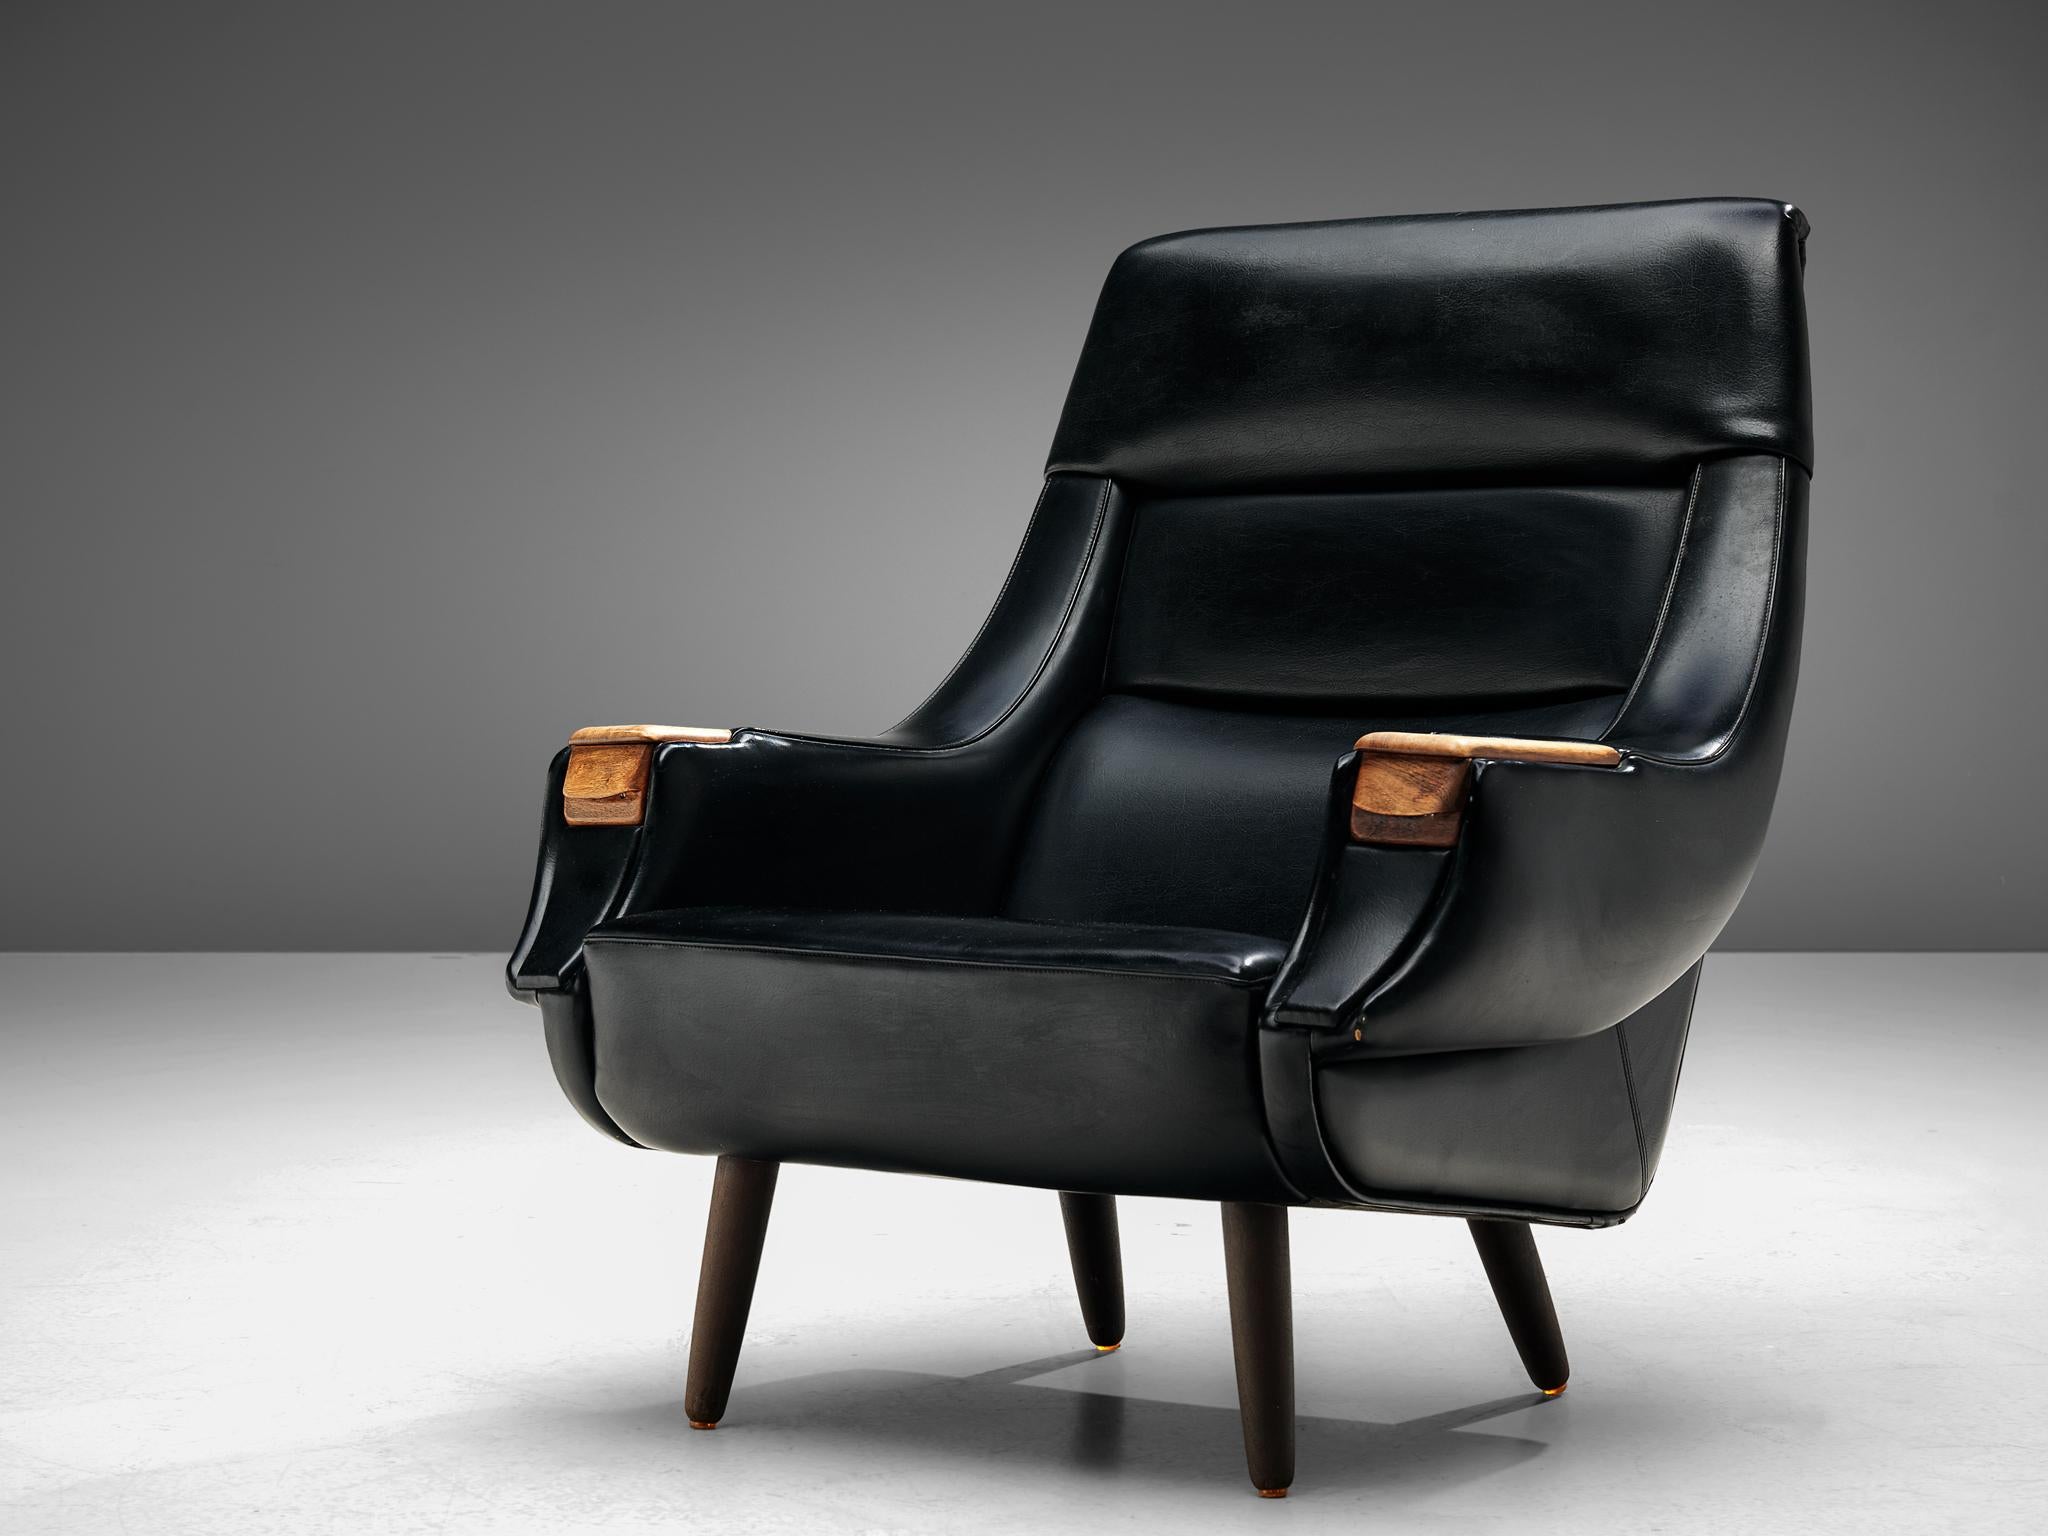 Henry Walter Klein for Bramin, lounge chair, black leatherette, wood, Denmark, 1960s.

Robust and comfortable lounge chair by the Danish designer H.W. Klein. The slightly curved shape of the backrest has a highly inviting appearance. The chair has